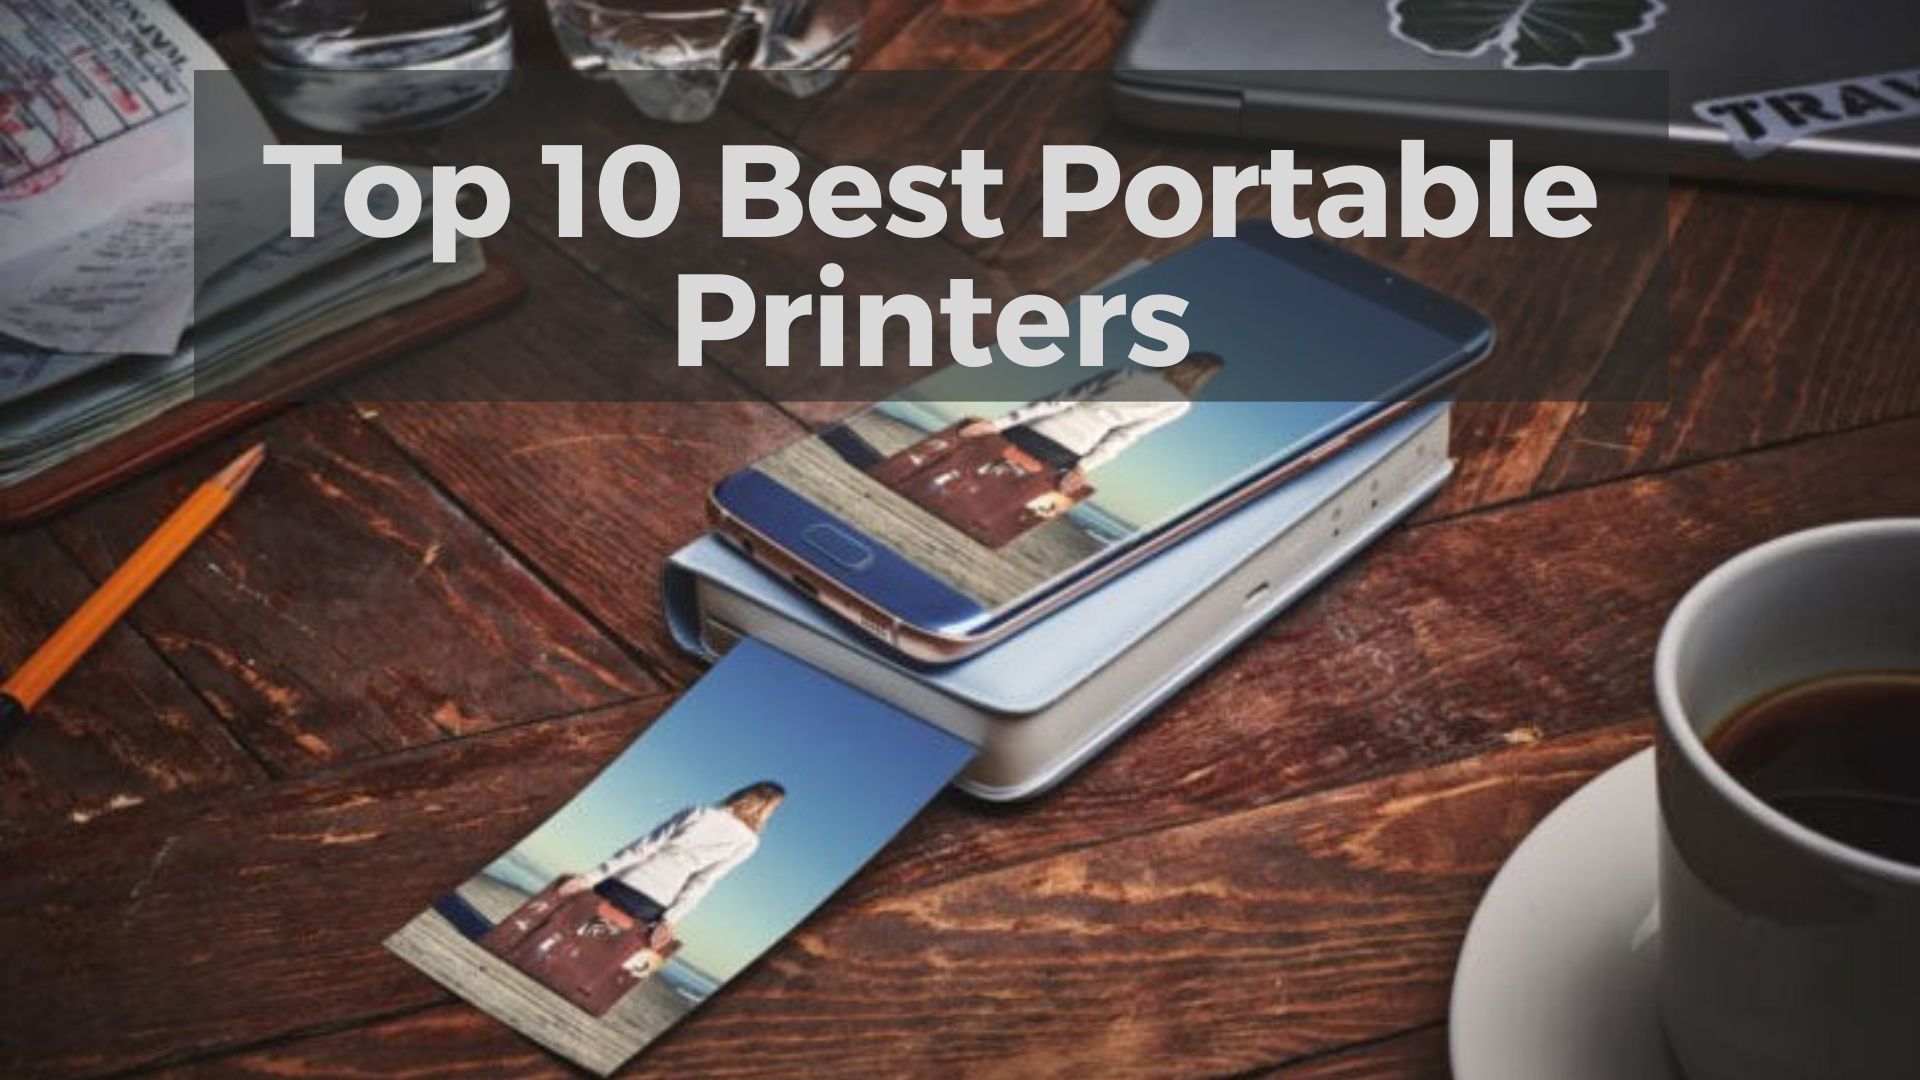 Top 10 Best Portable Printers (Review) In 2020